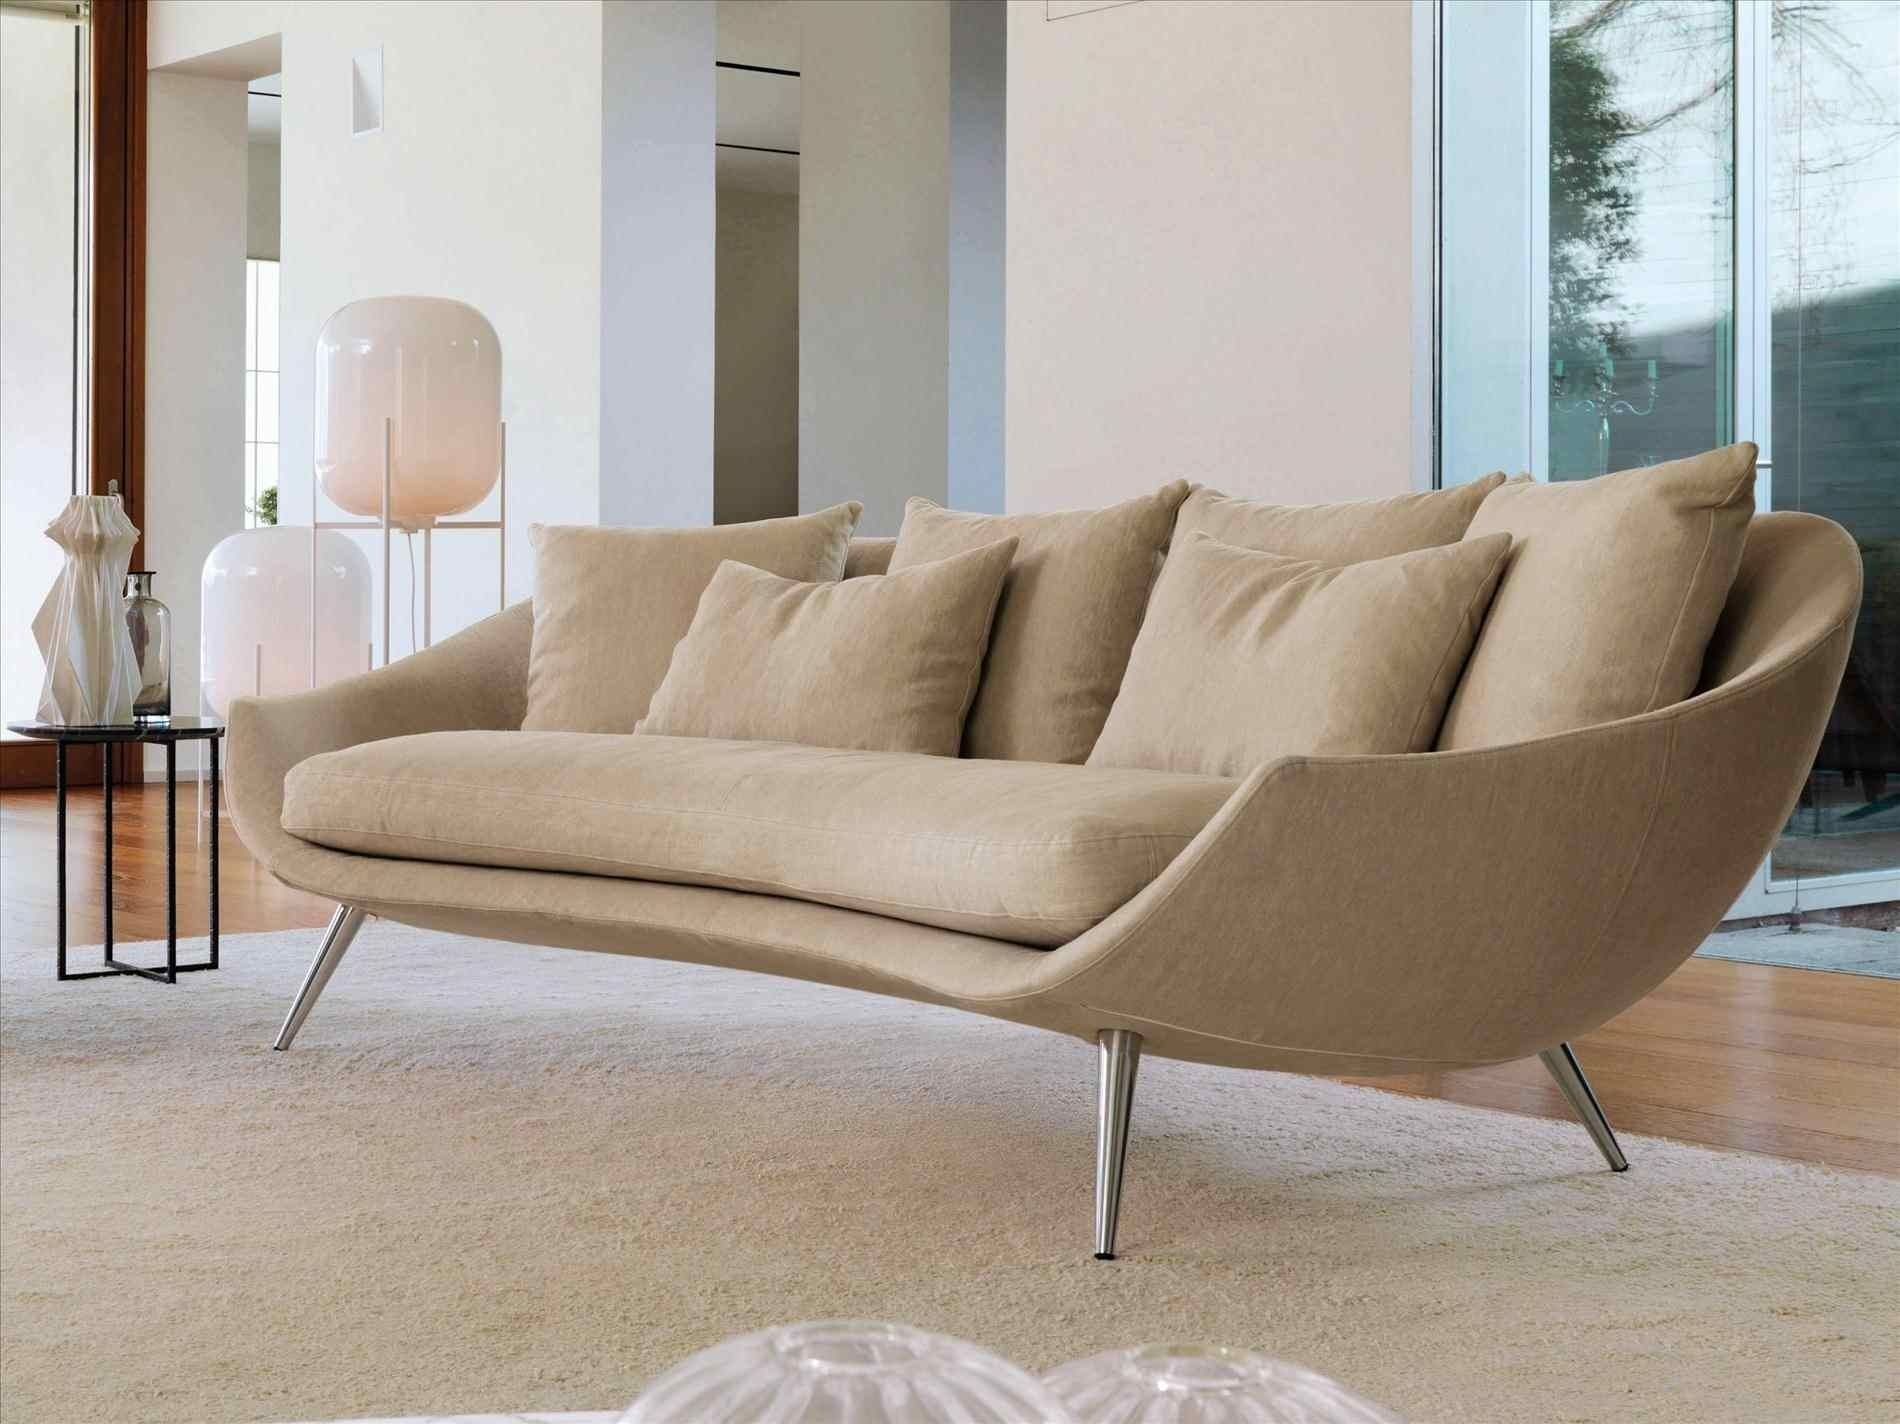 Best 10+ of Removable Covers Sectional Sofas